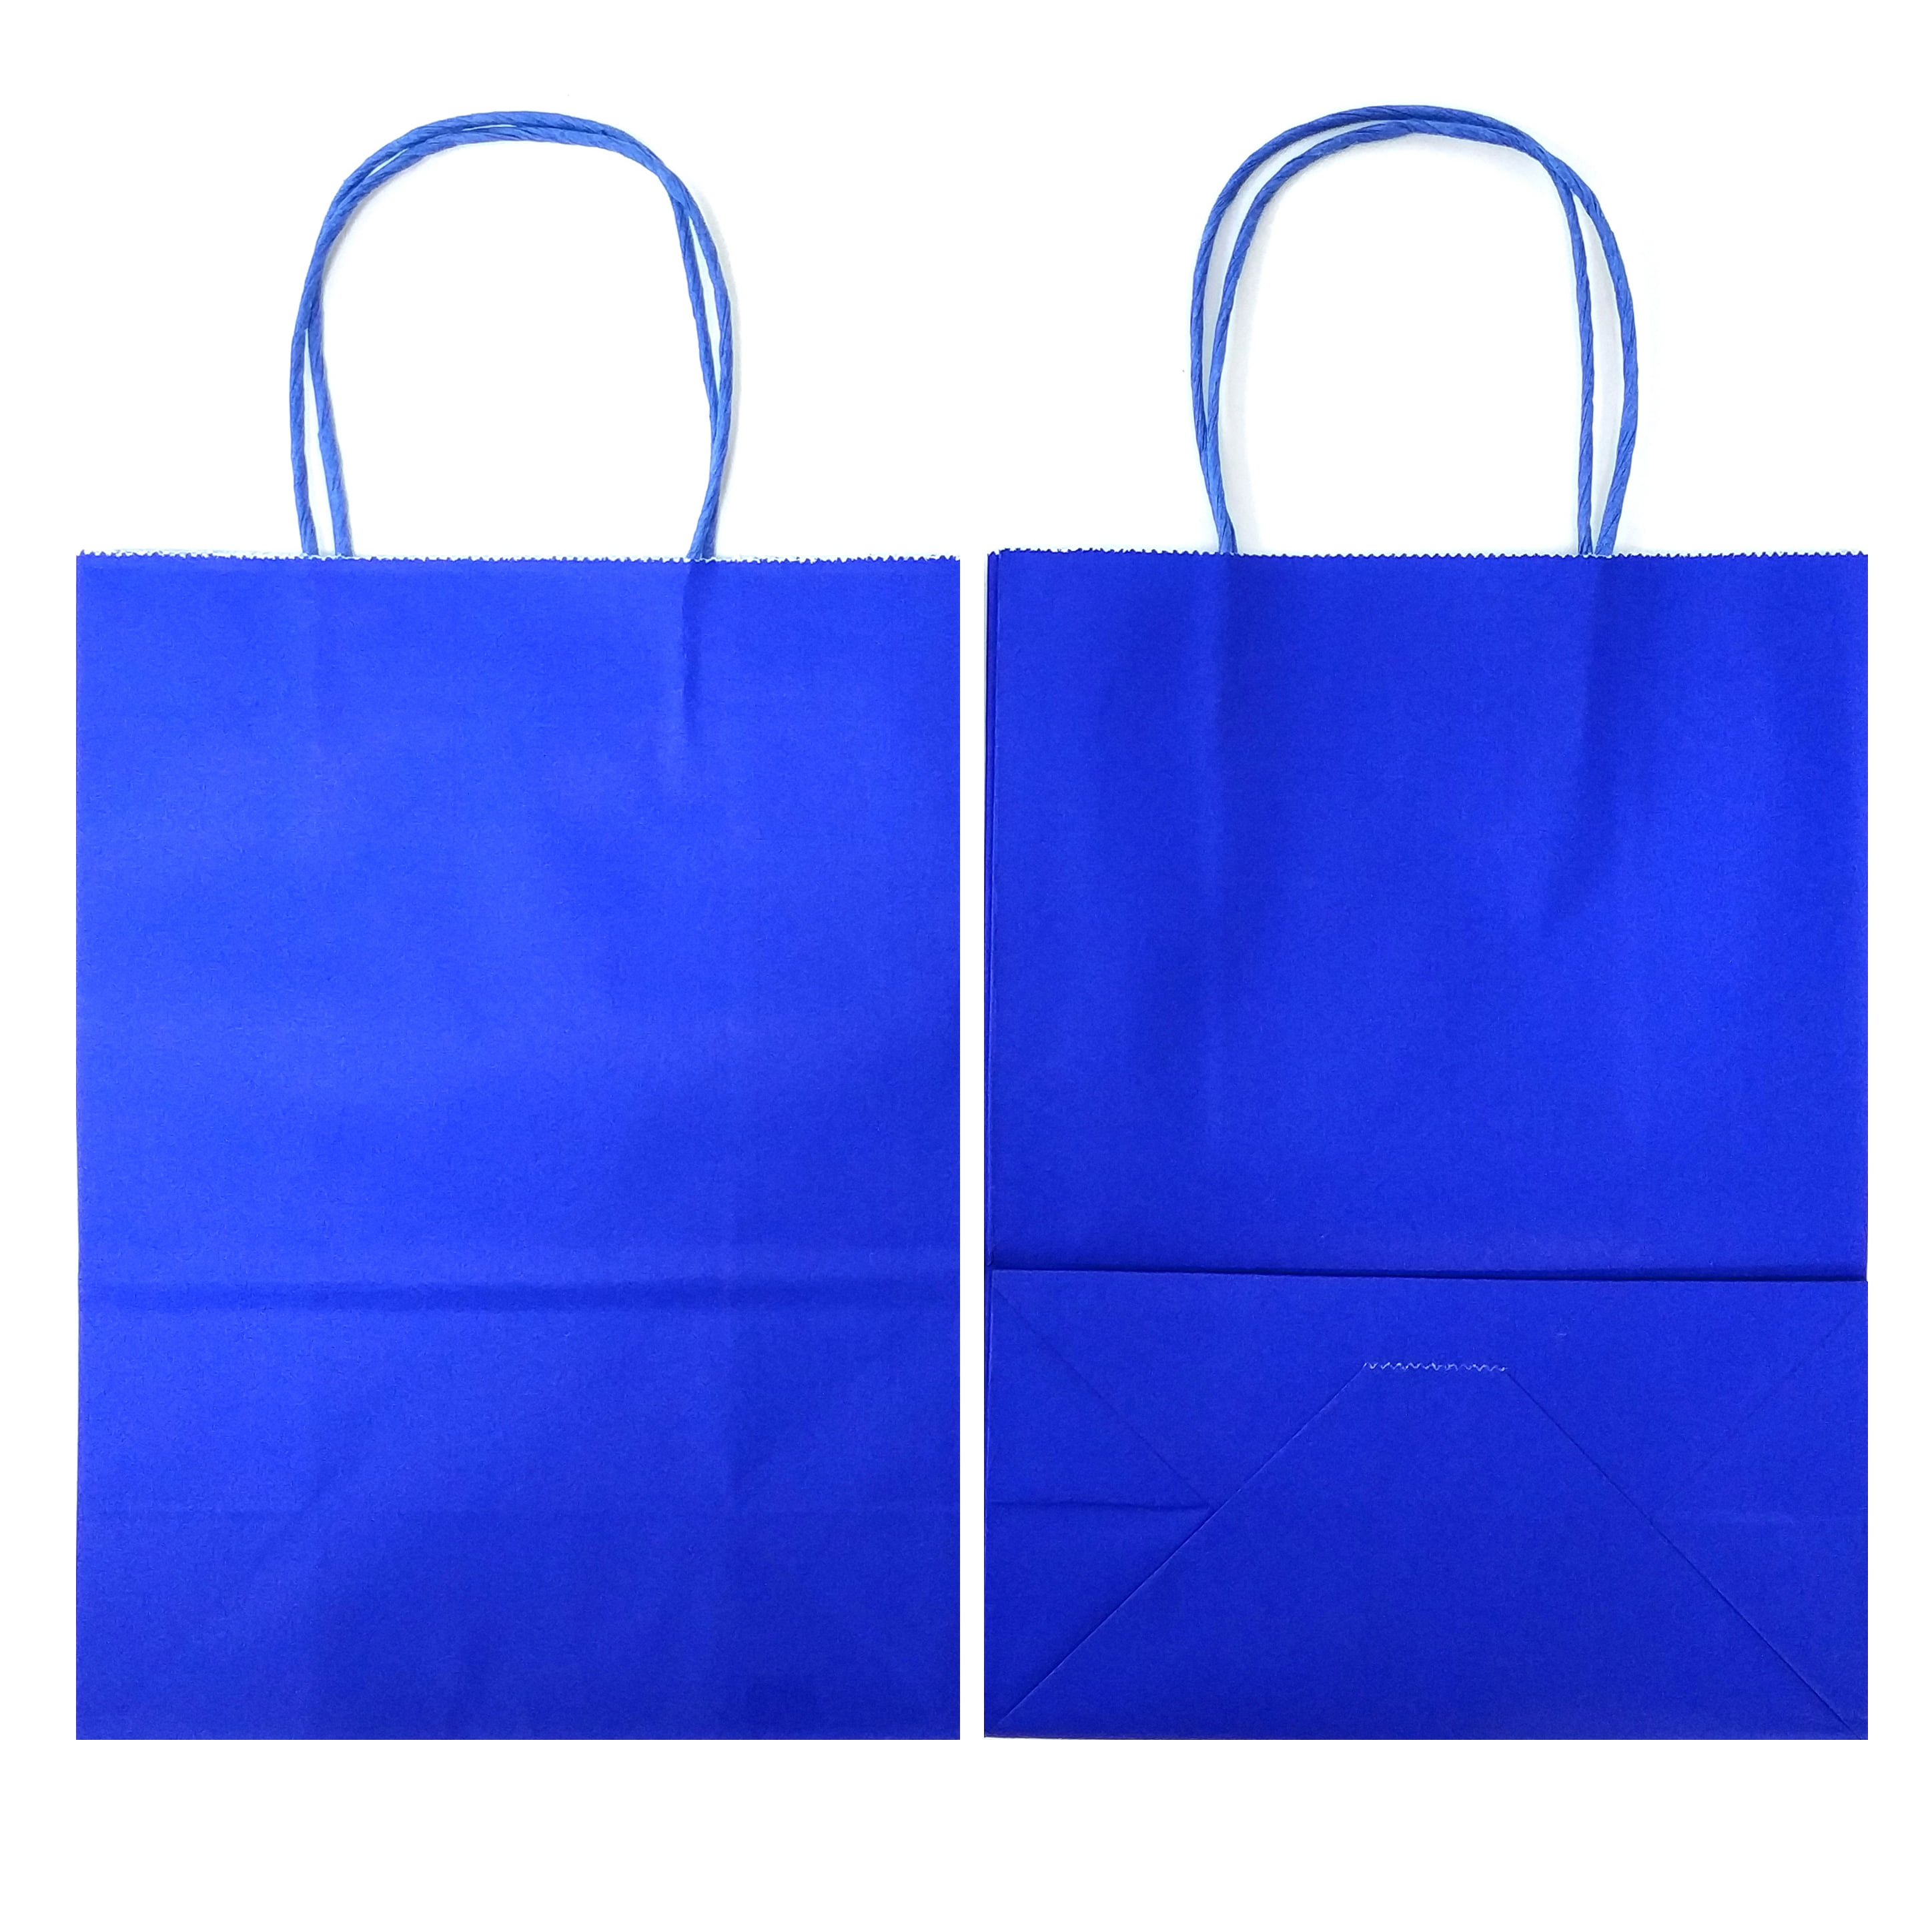 AZOWA Gift Bags Large Kraft Paper Bags with Handles 9.8 x 7.5 x 3.9 in, Royal Blue, 25 Pcs 